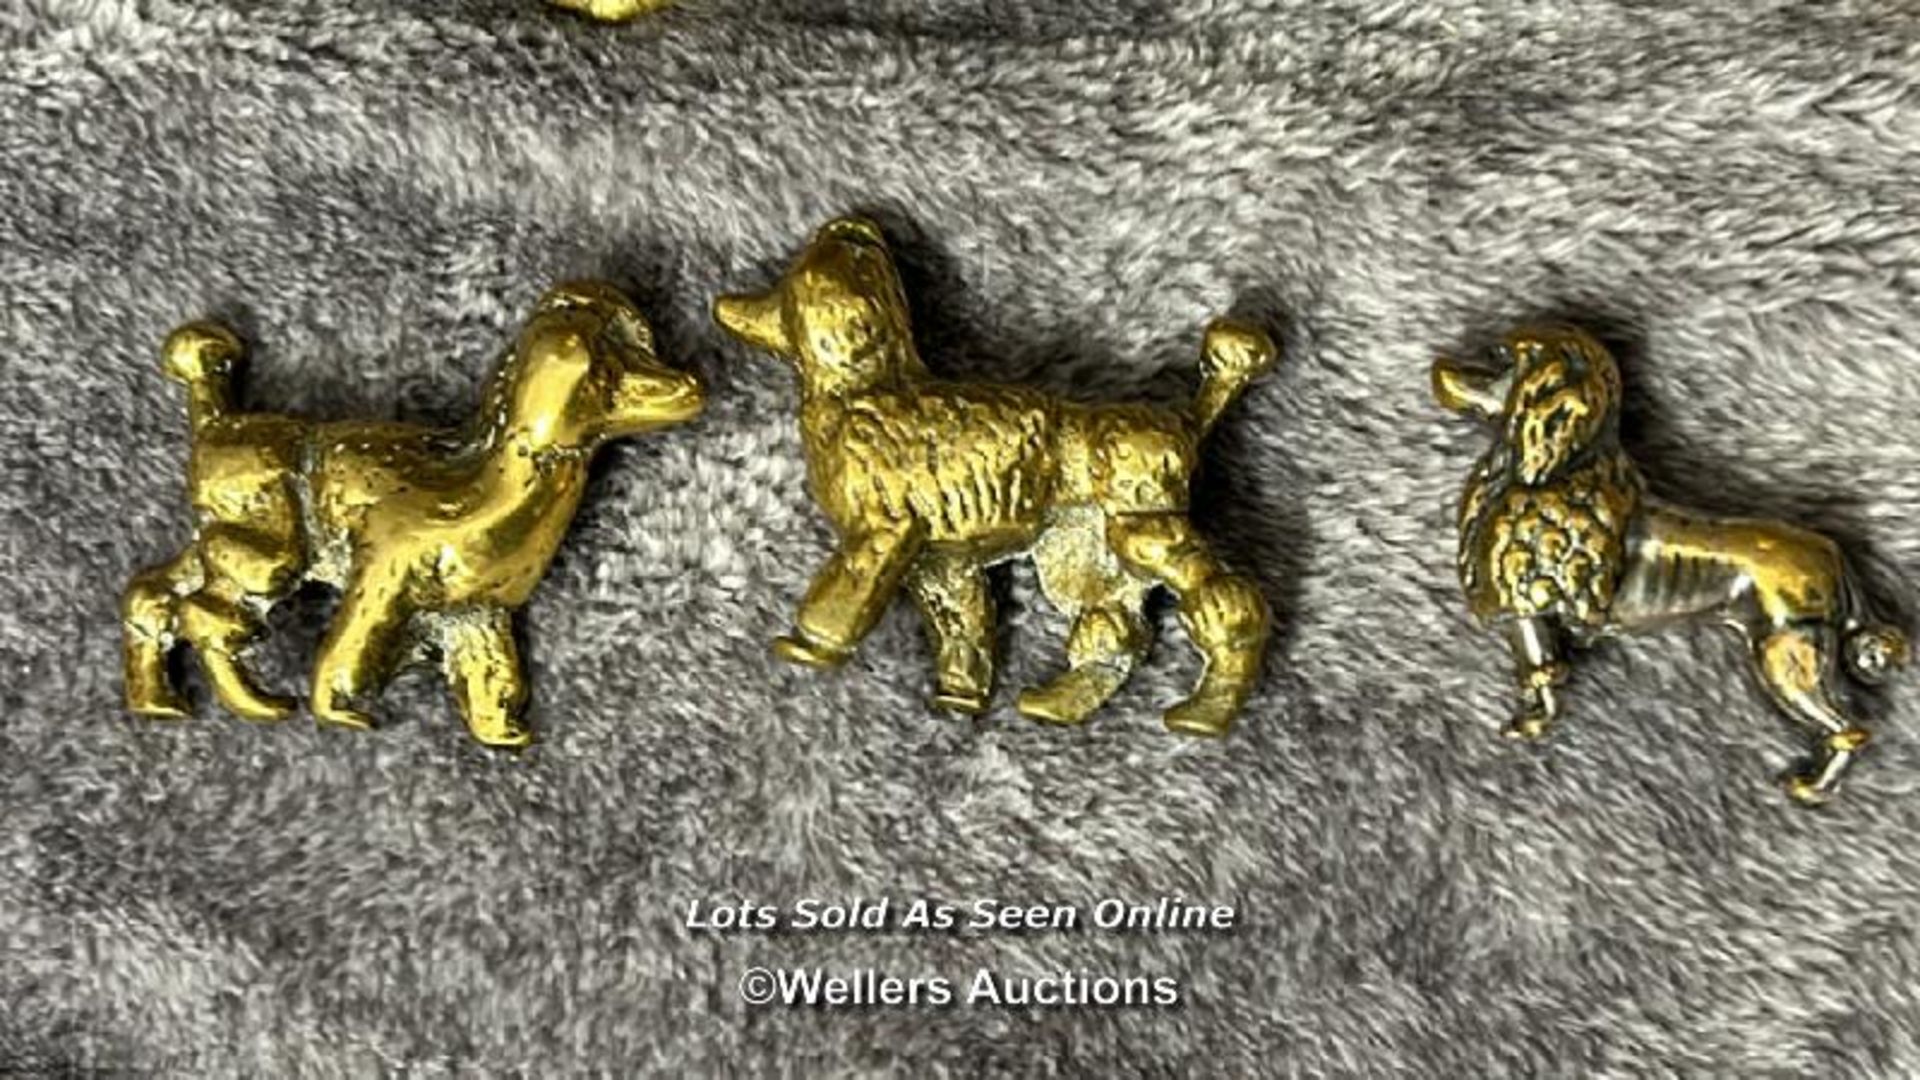 Brass Bulldog 15cm high with three small brass poodles and African stlye brass pendant / AN3 - Image 2 of 3